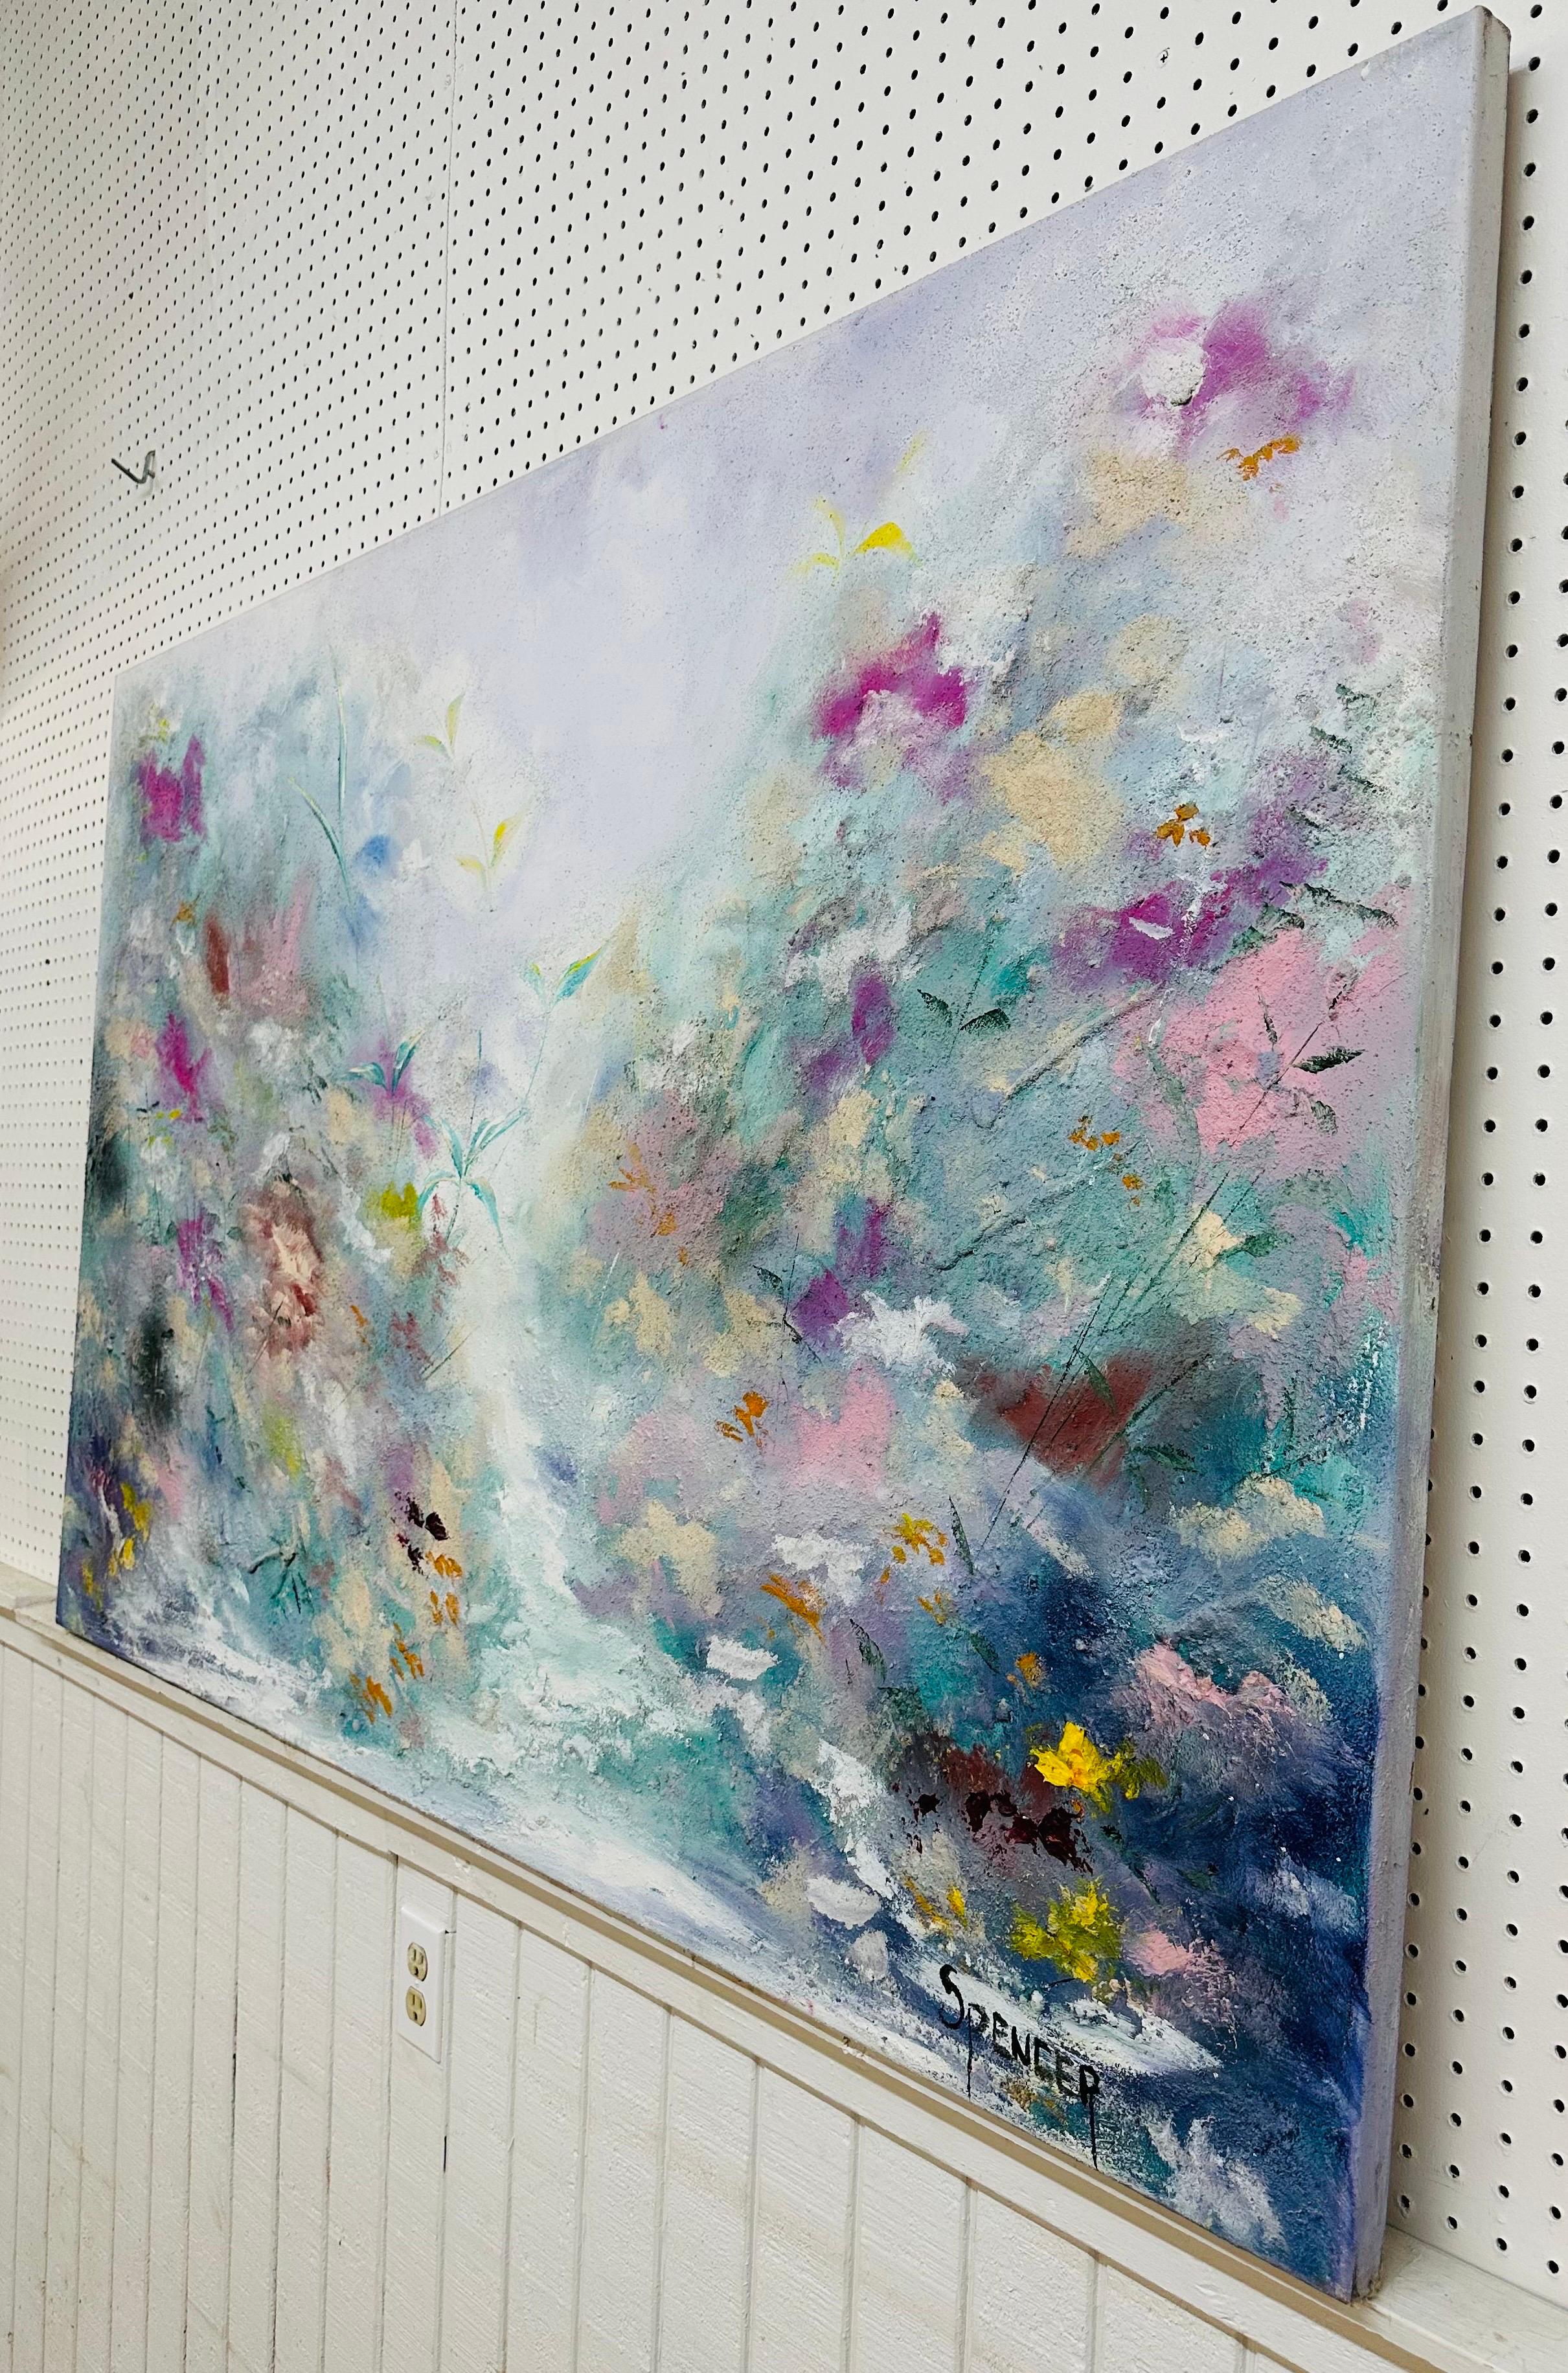 This listing is for a Modern Abstract Painting signed Spencer. Featuring an unframed original expressionist abstract style with a mixture of beautiful colors. This is an exceptional piece by artist Spencer.